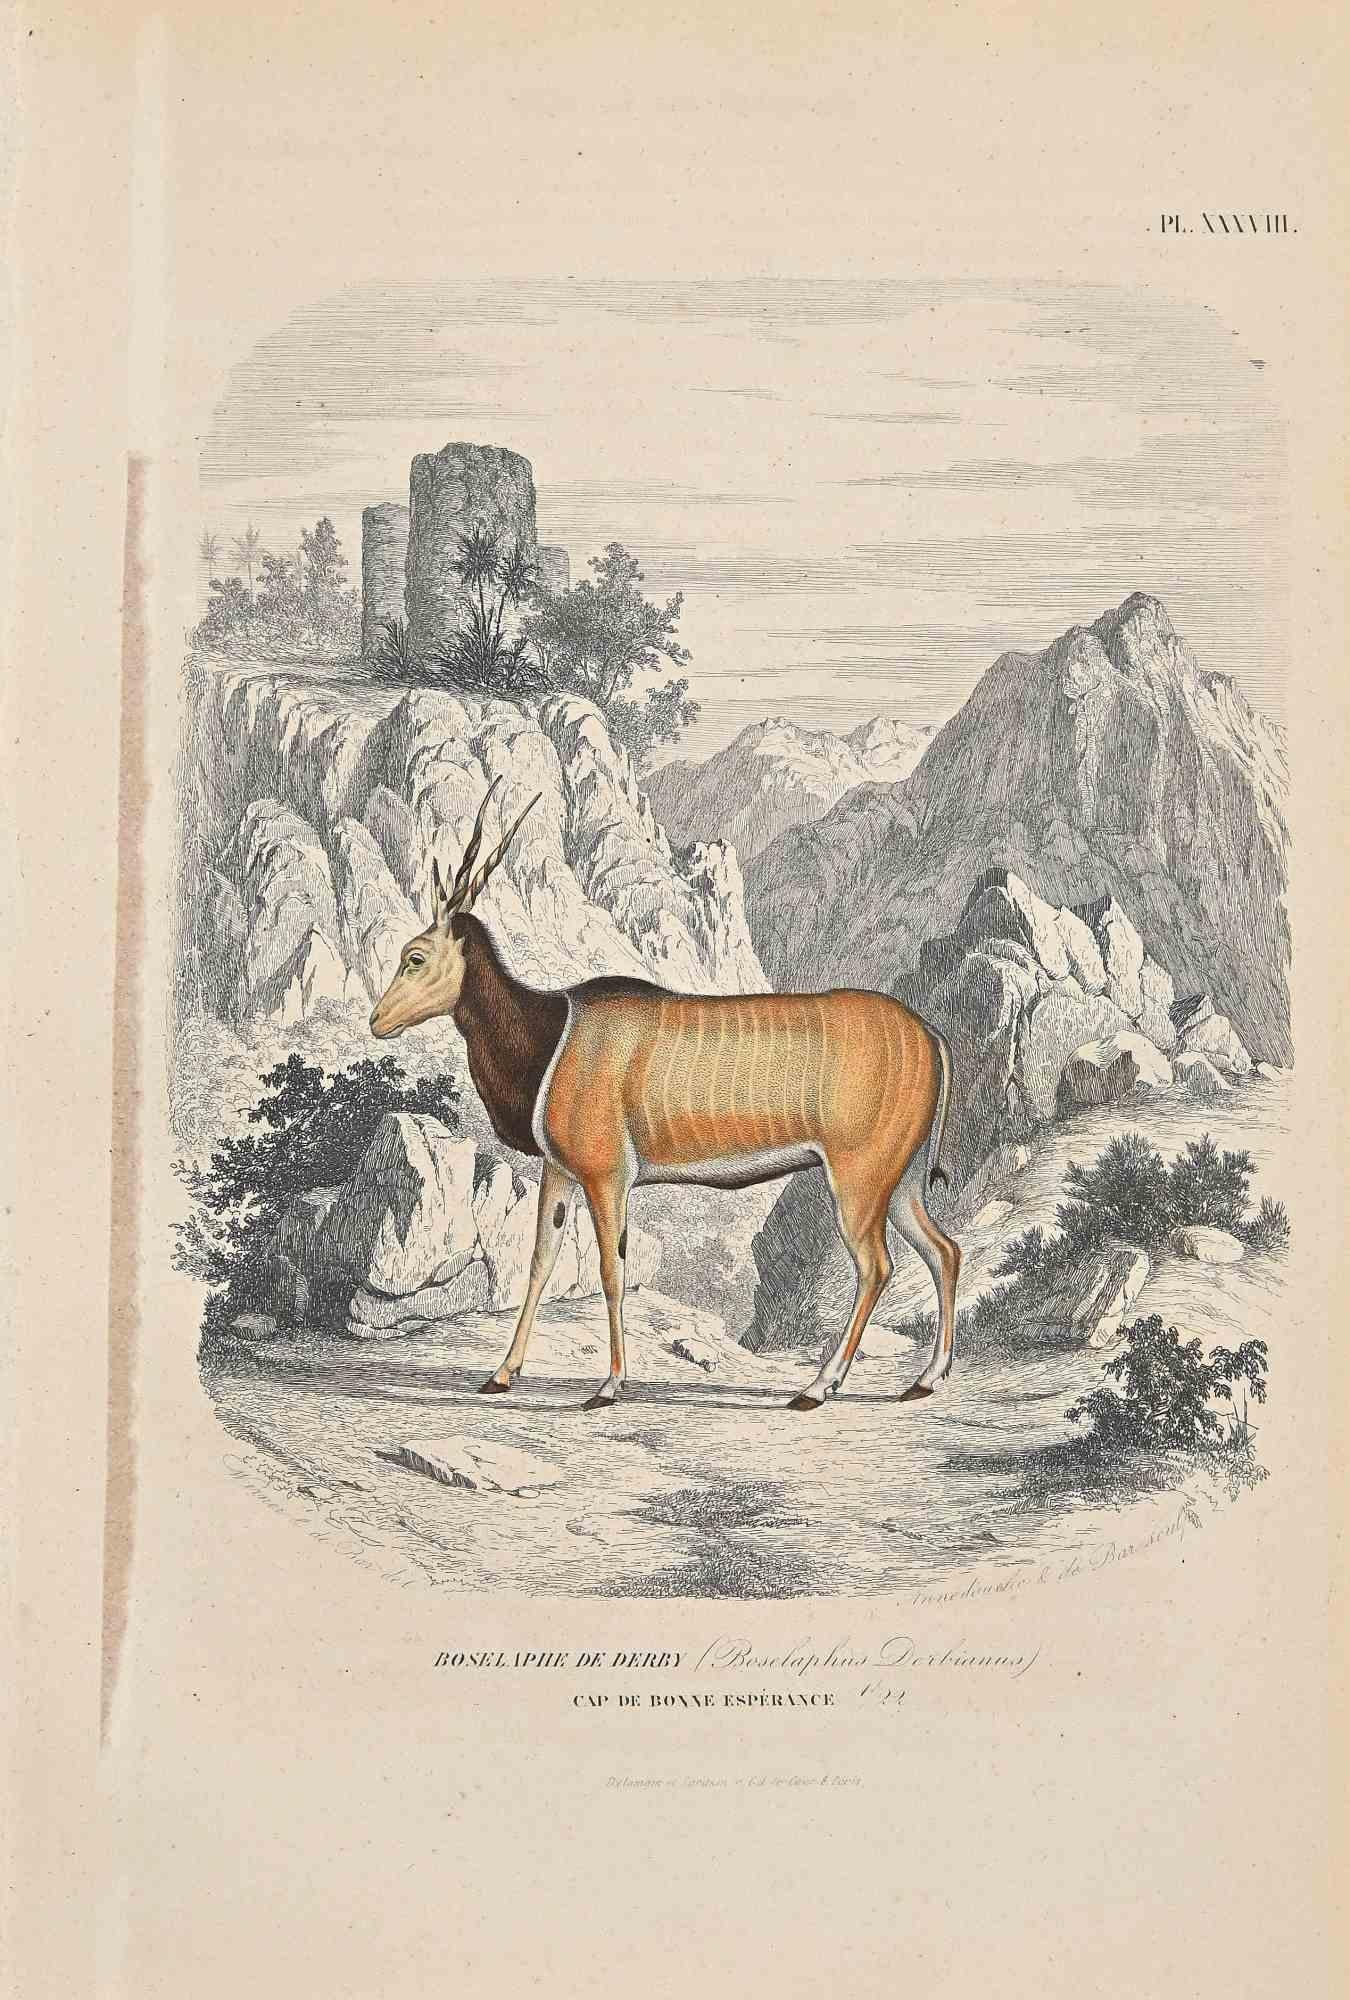 Boselaphe  De Derby is an original colored lithograph on ivory-colored paper, realized by Paul Gervais (1816-1879). The artwork is from The Series of "Les Trois Règnes de la Nature", and was published in 1854.

Good conditions

Titled on the